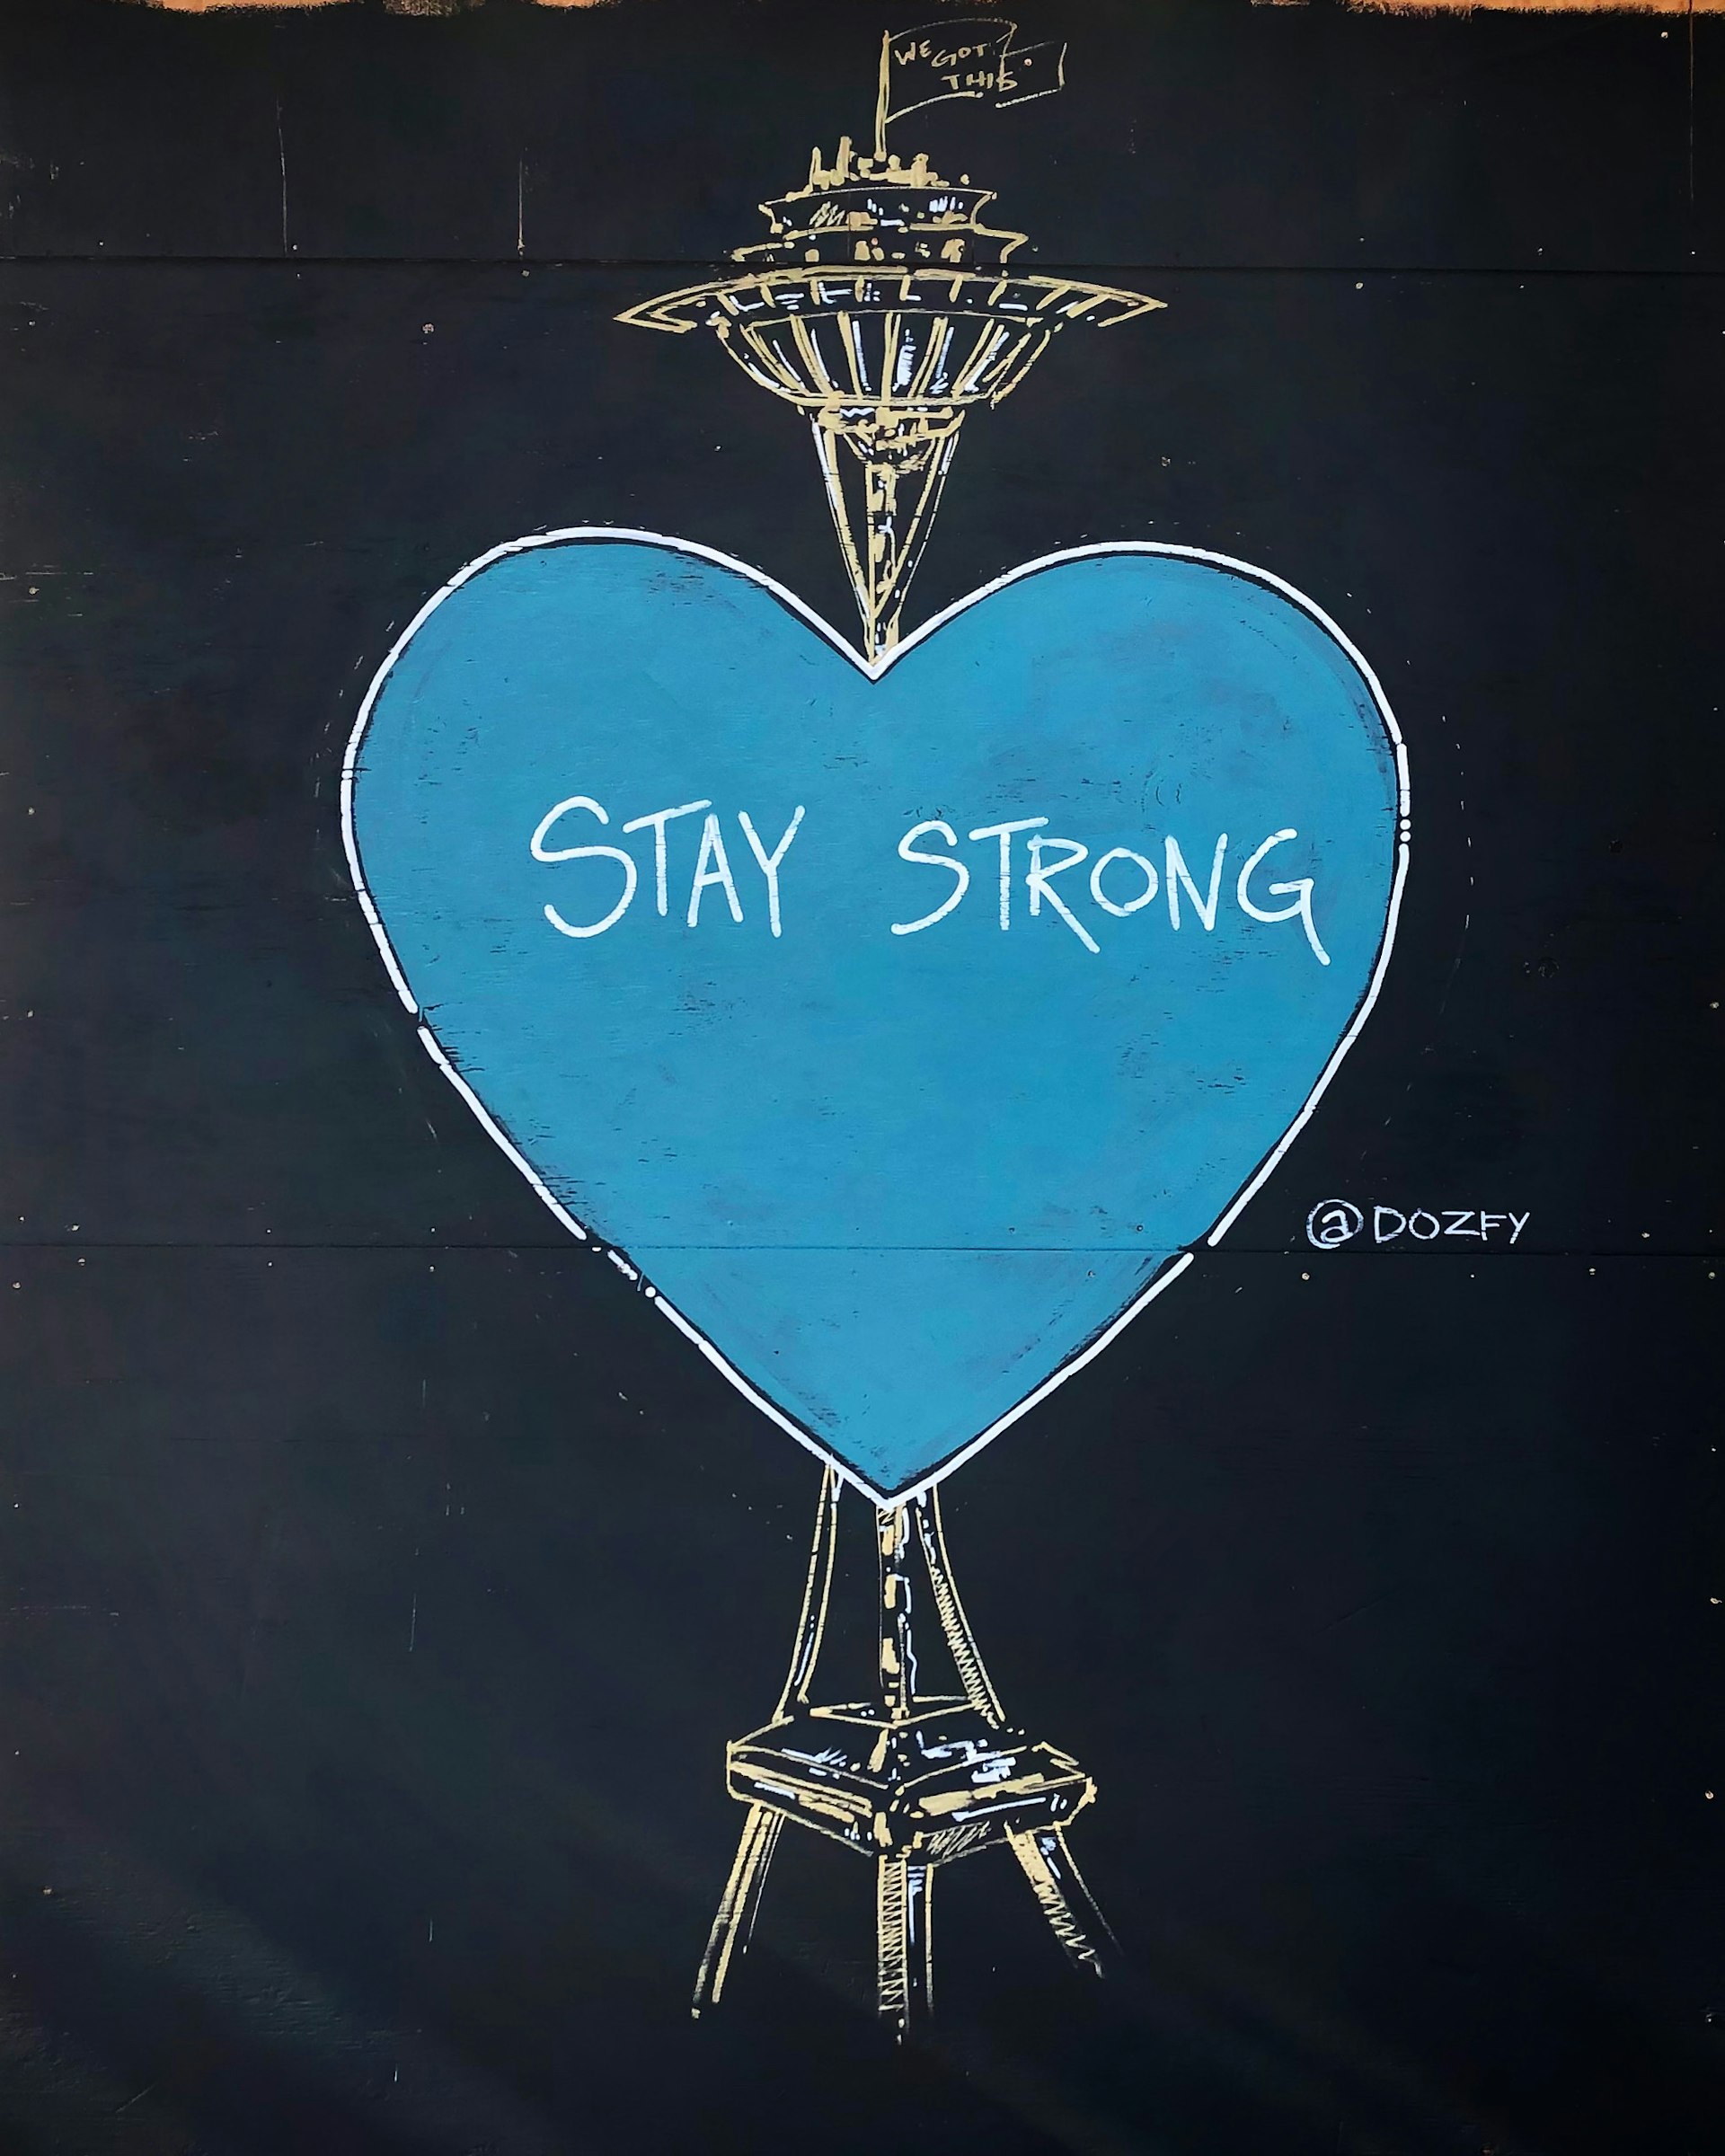 Dozfy's Stay Strong mural in Seattle